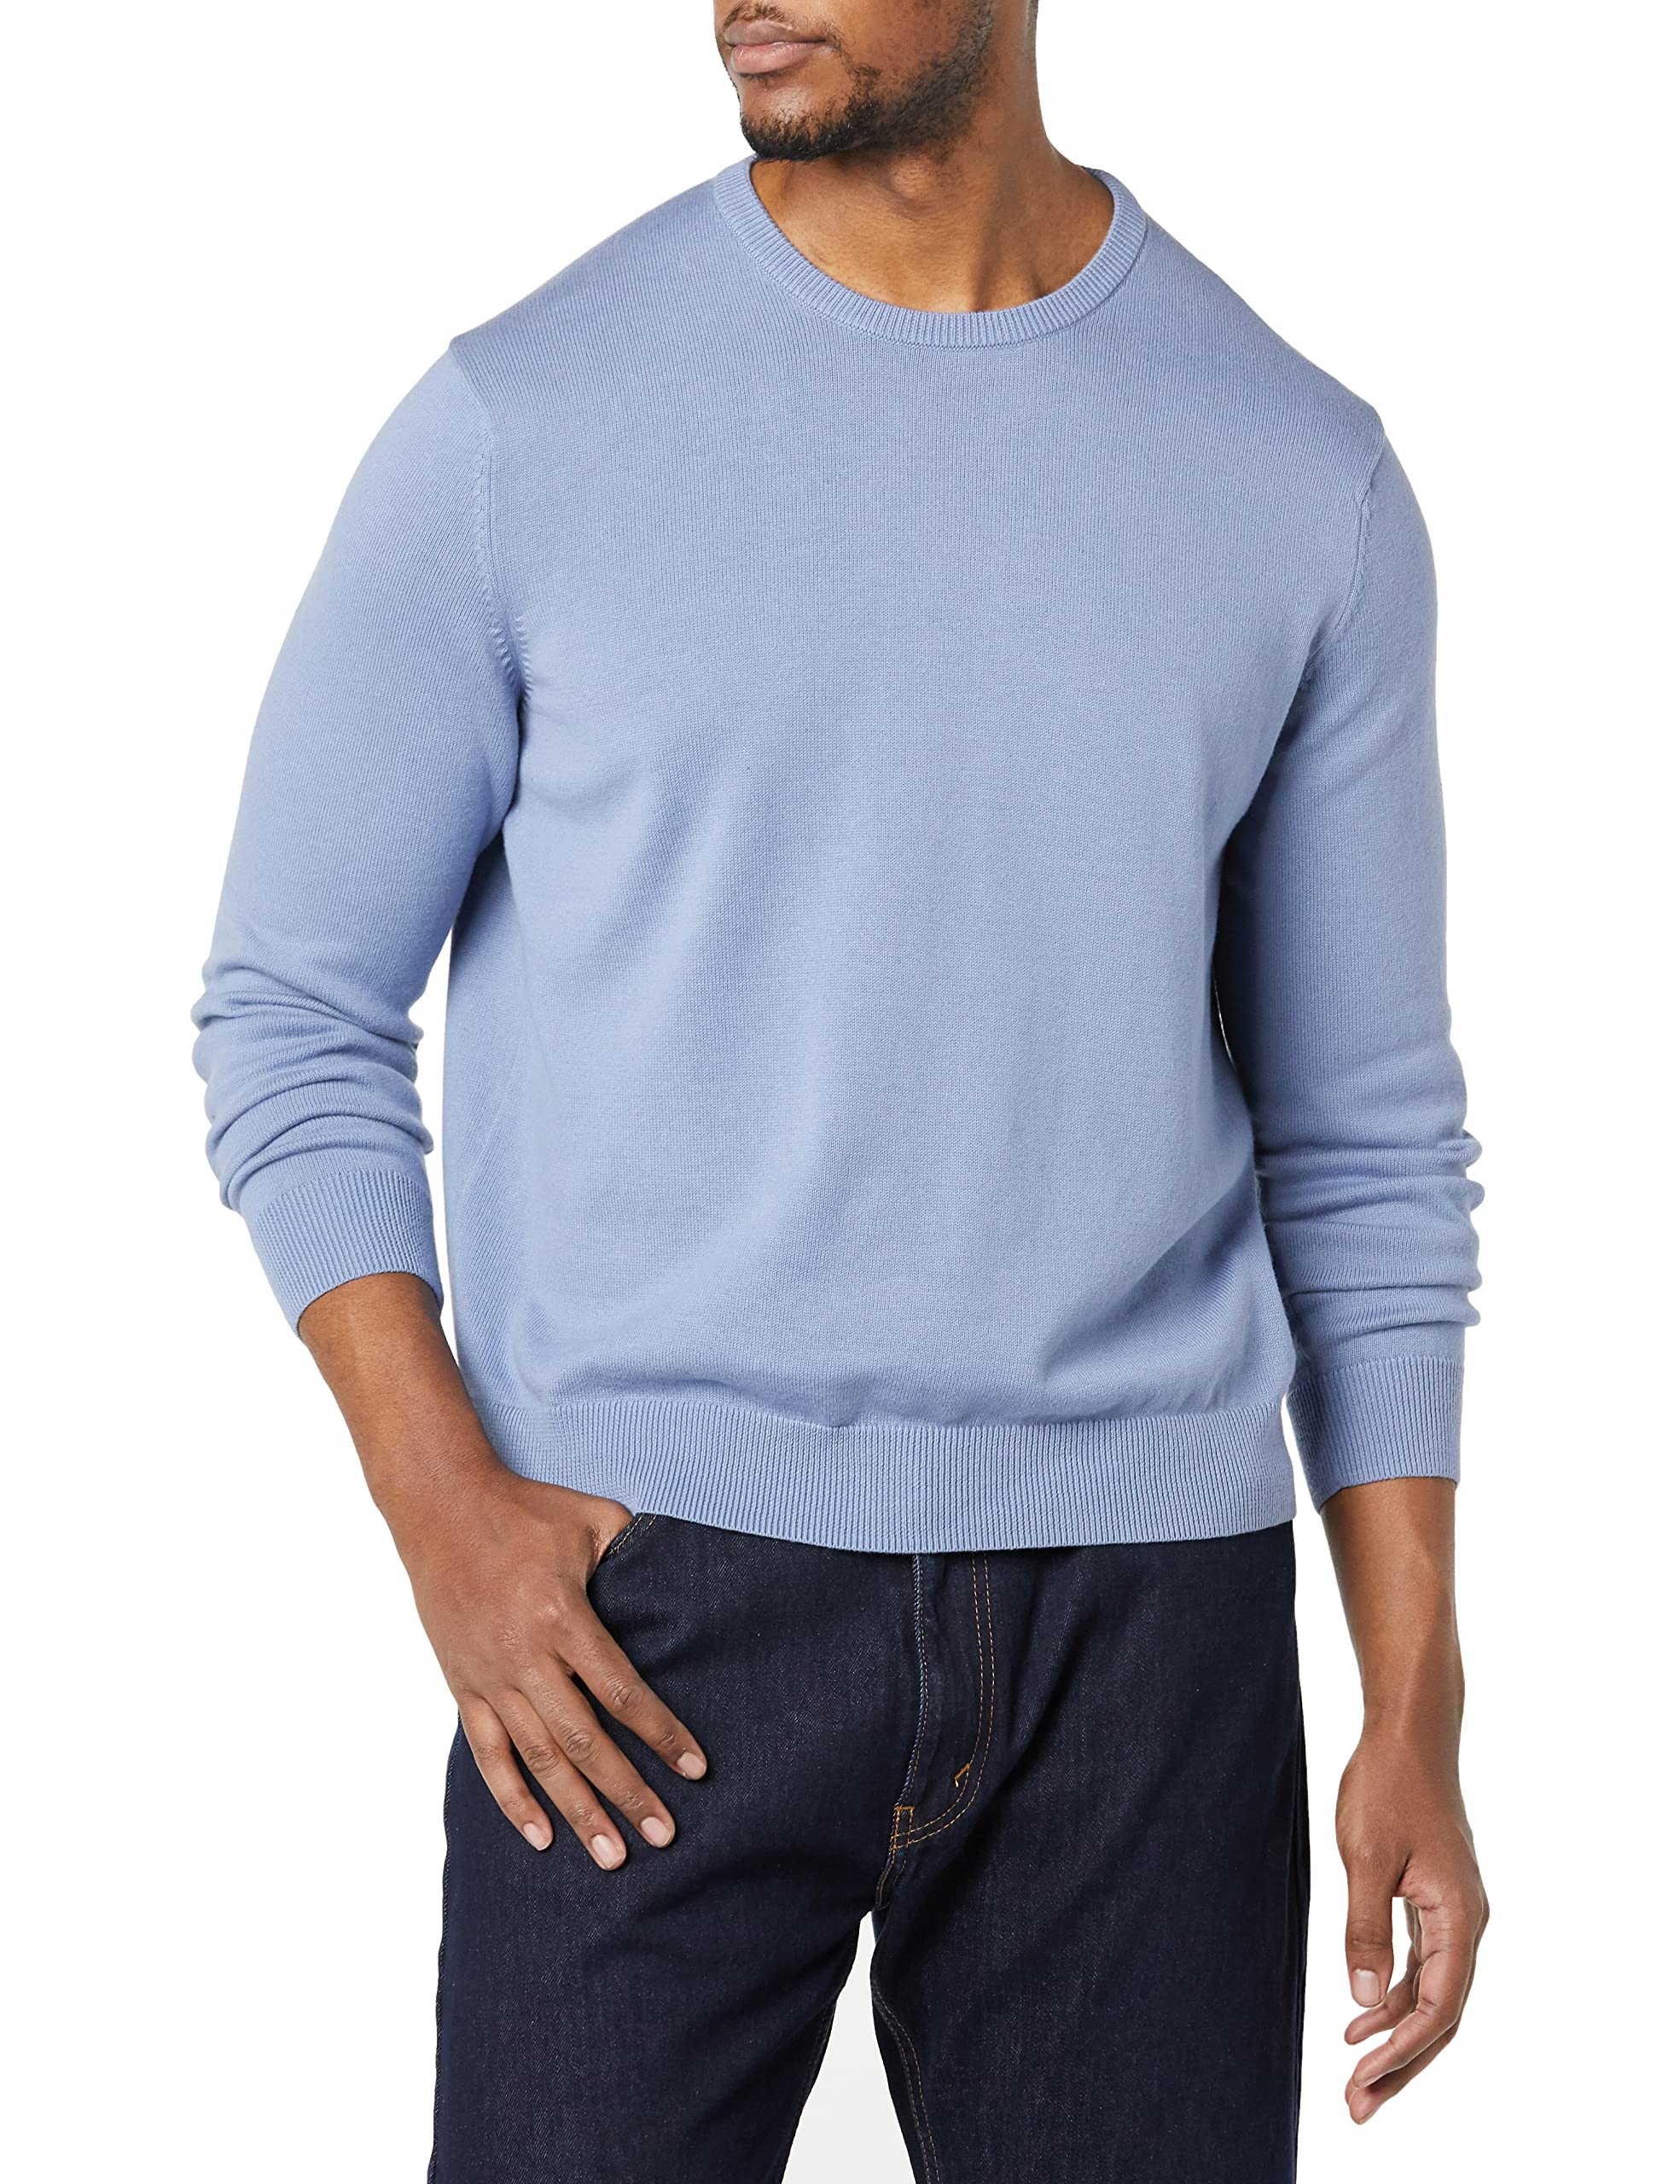 Amazon Essentials Men's Crewneck Sweater (Available in Big & Tall)